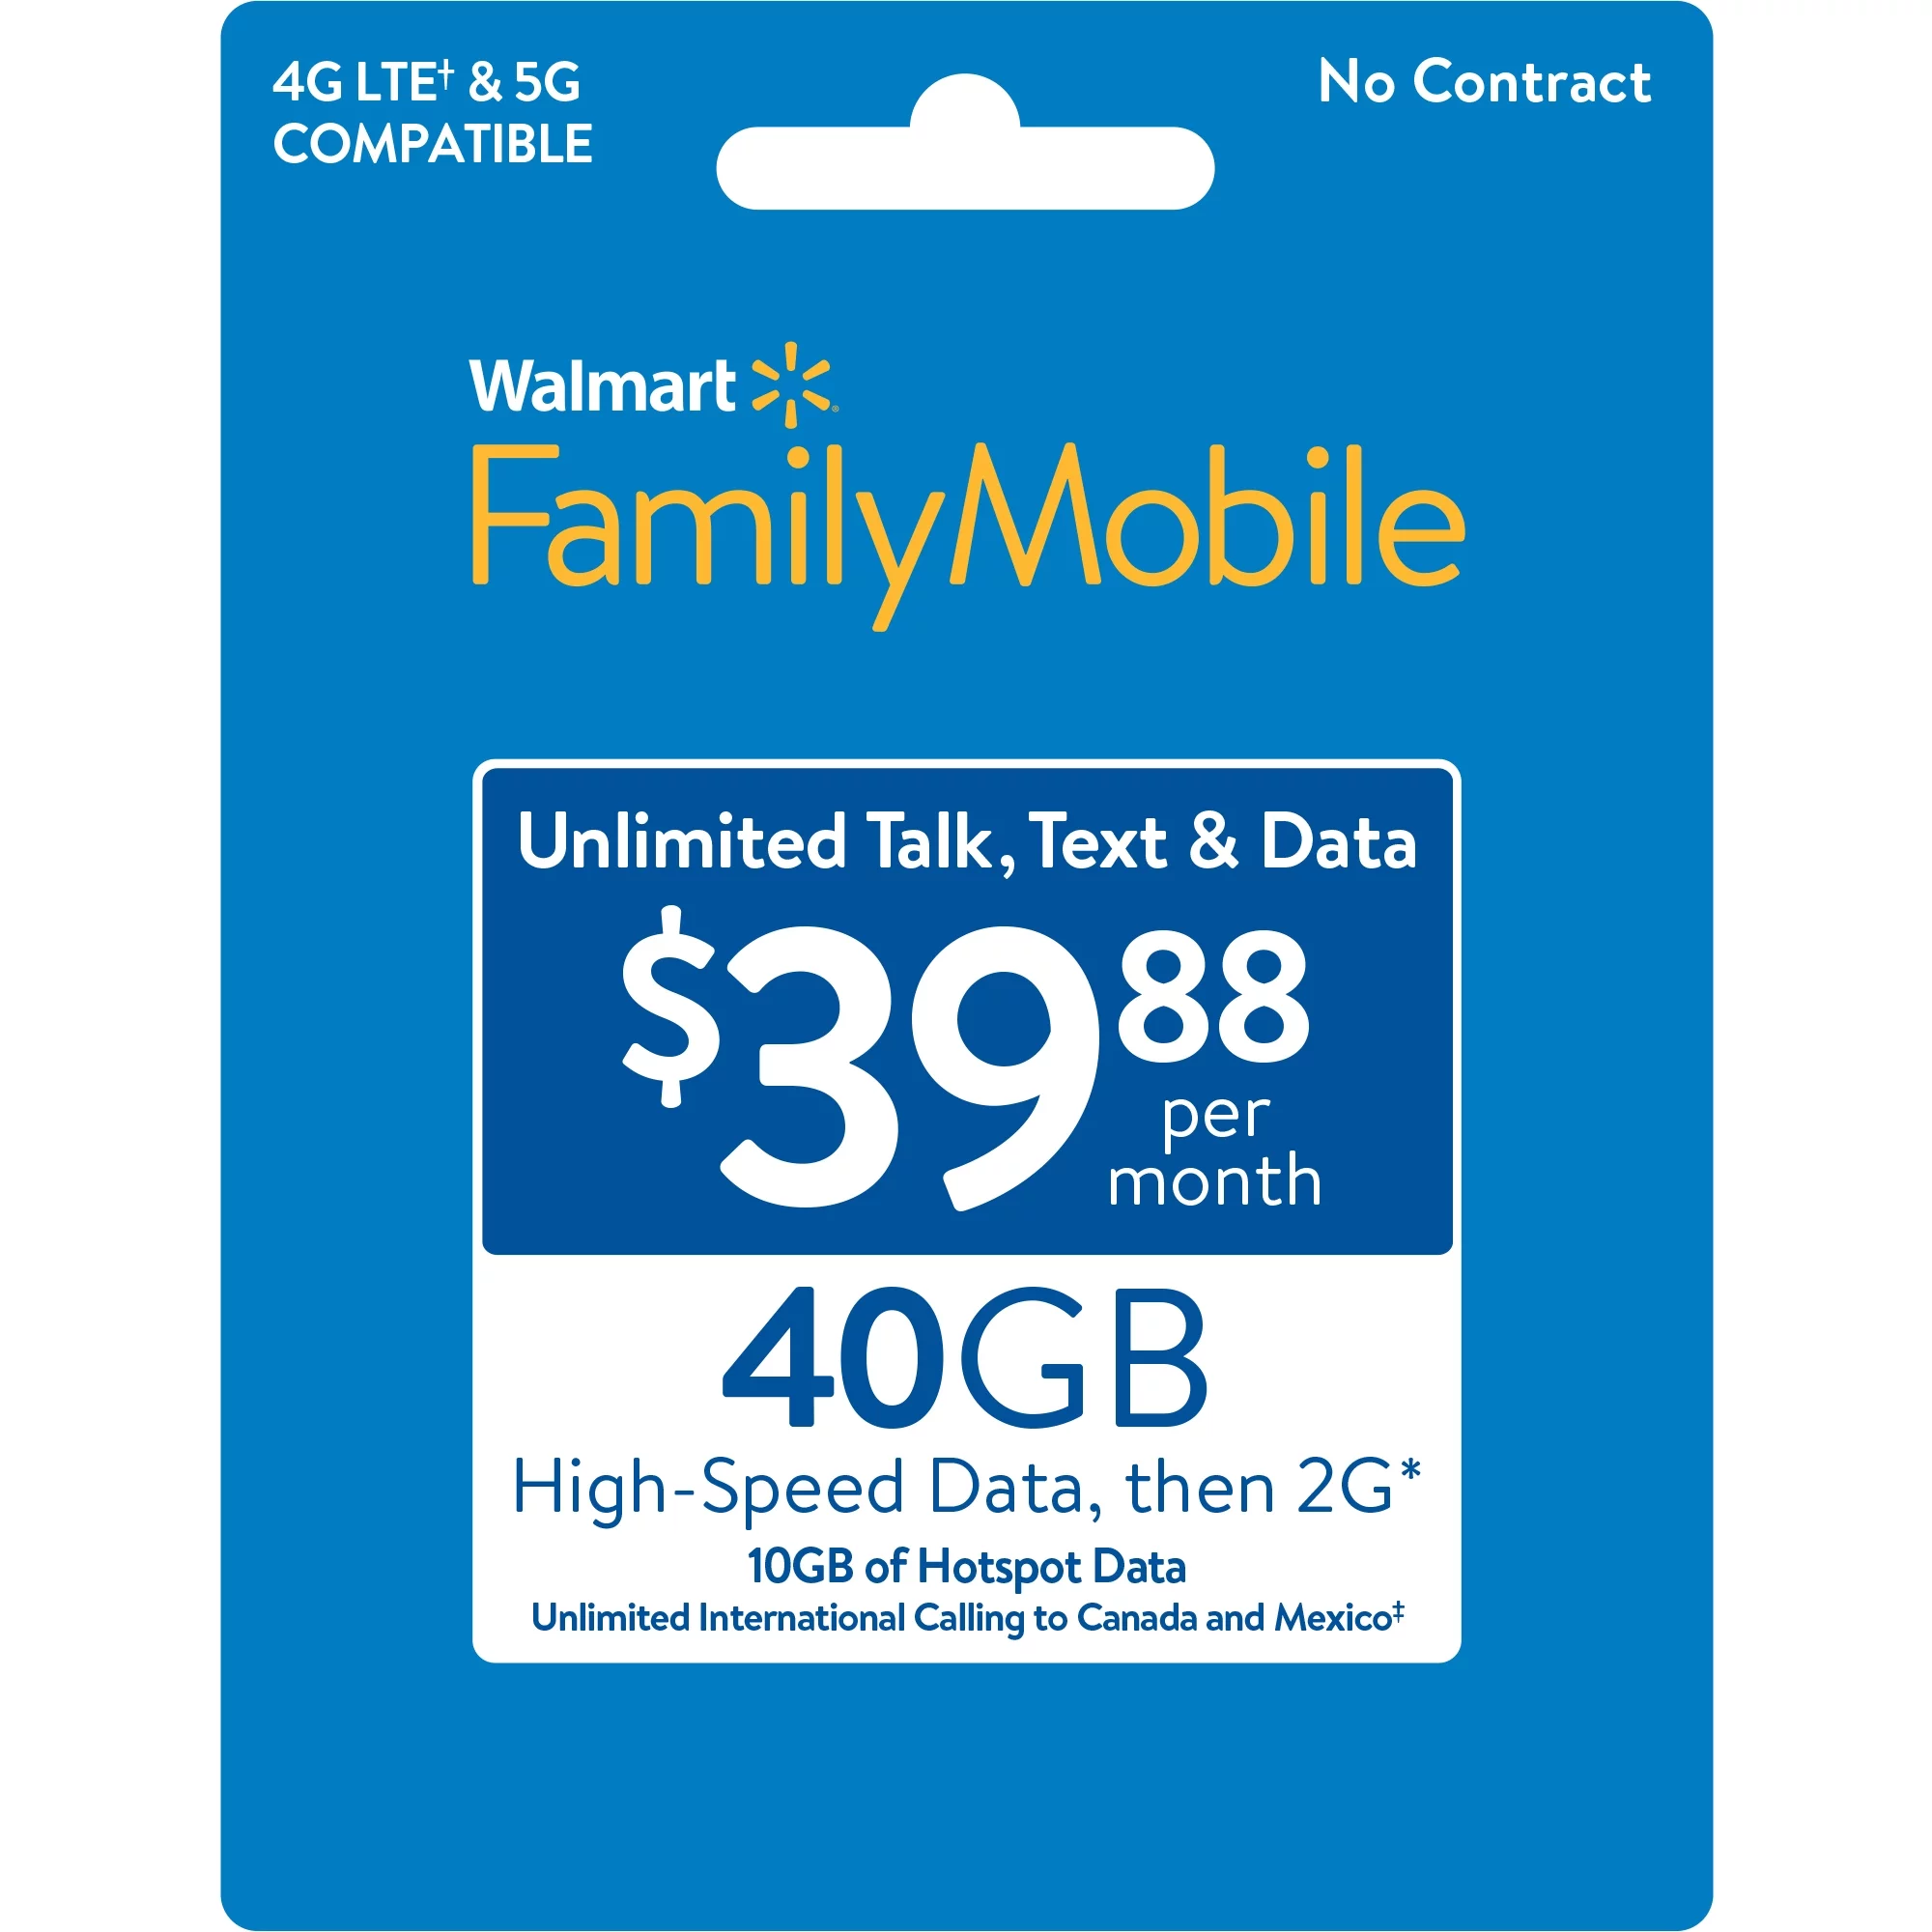 Walmart Family Mobile $39.88 Unlimited Monthly Prepaid Plan (40GB at High Speed, then 2G) + 10GB Mobile Hotspot Direct Top Up